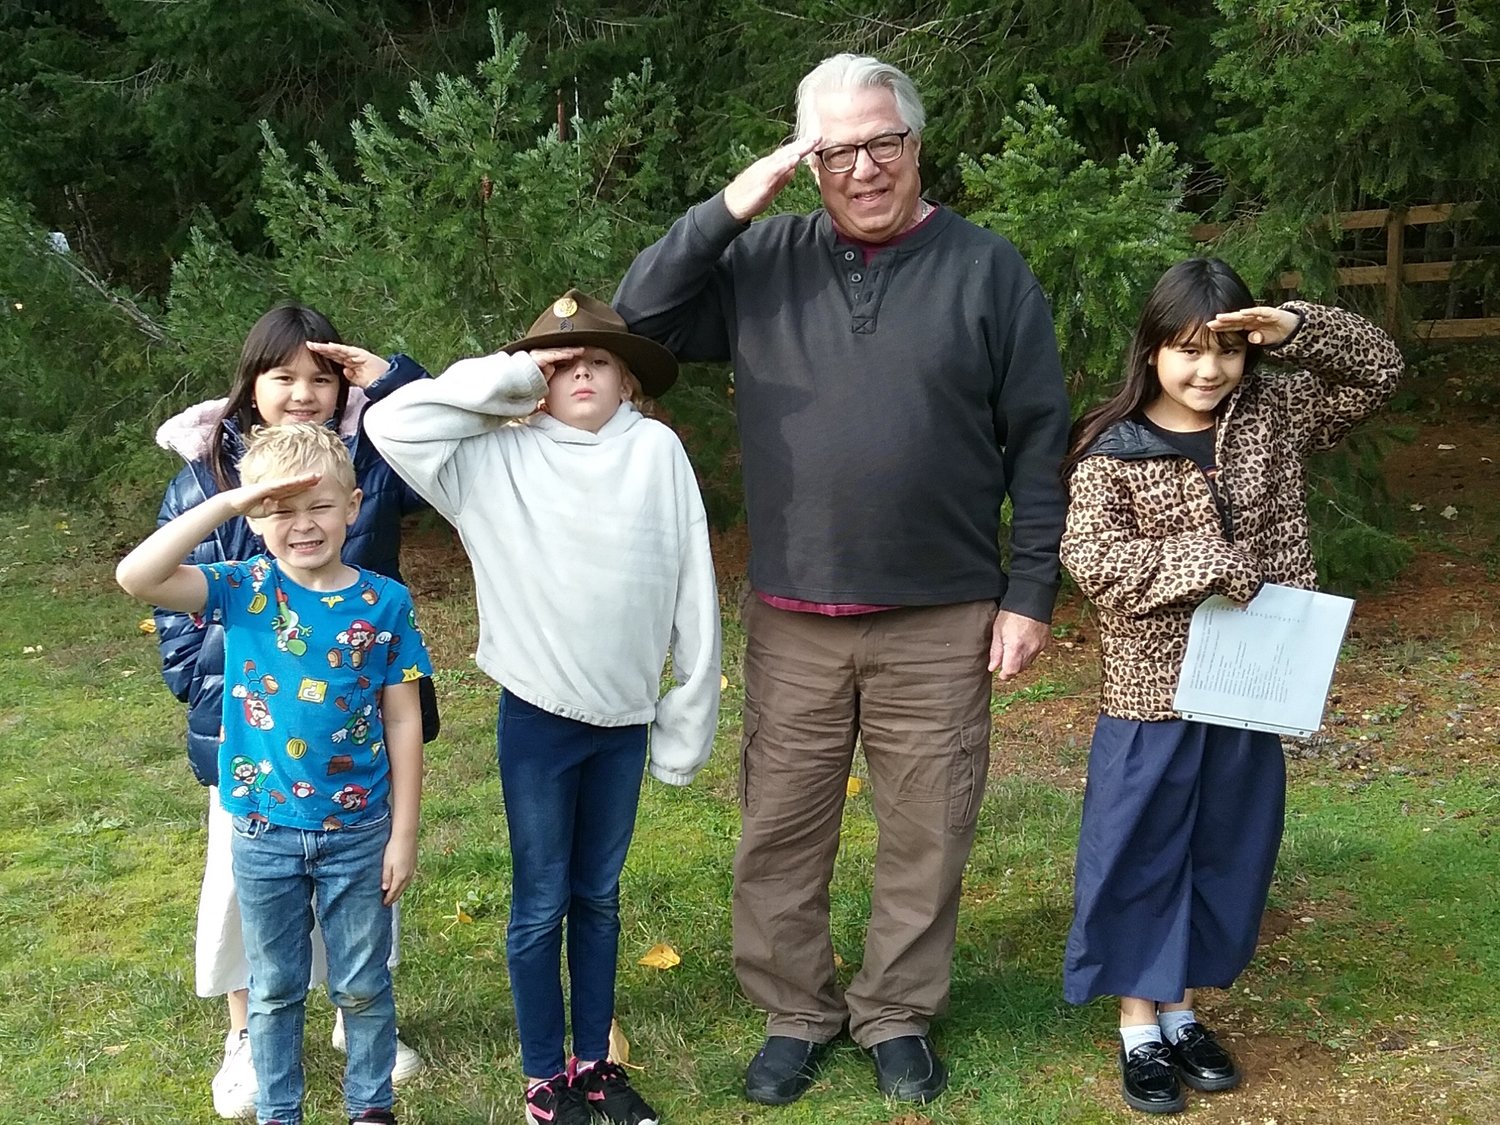 Local children placed flags on 18 Veterans' graves at the Point Roberts cemetery with guidance from a district commissioner. Bill Zidell stopped by to pay his respect and show the kids his Army Rangers hat.